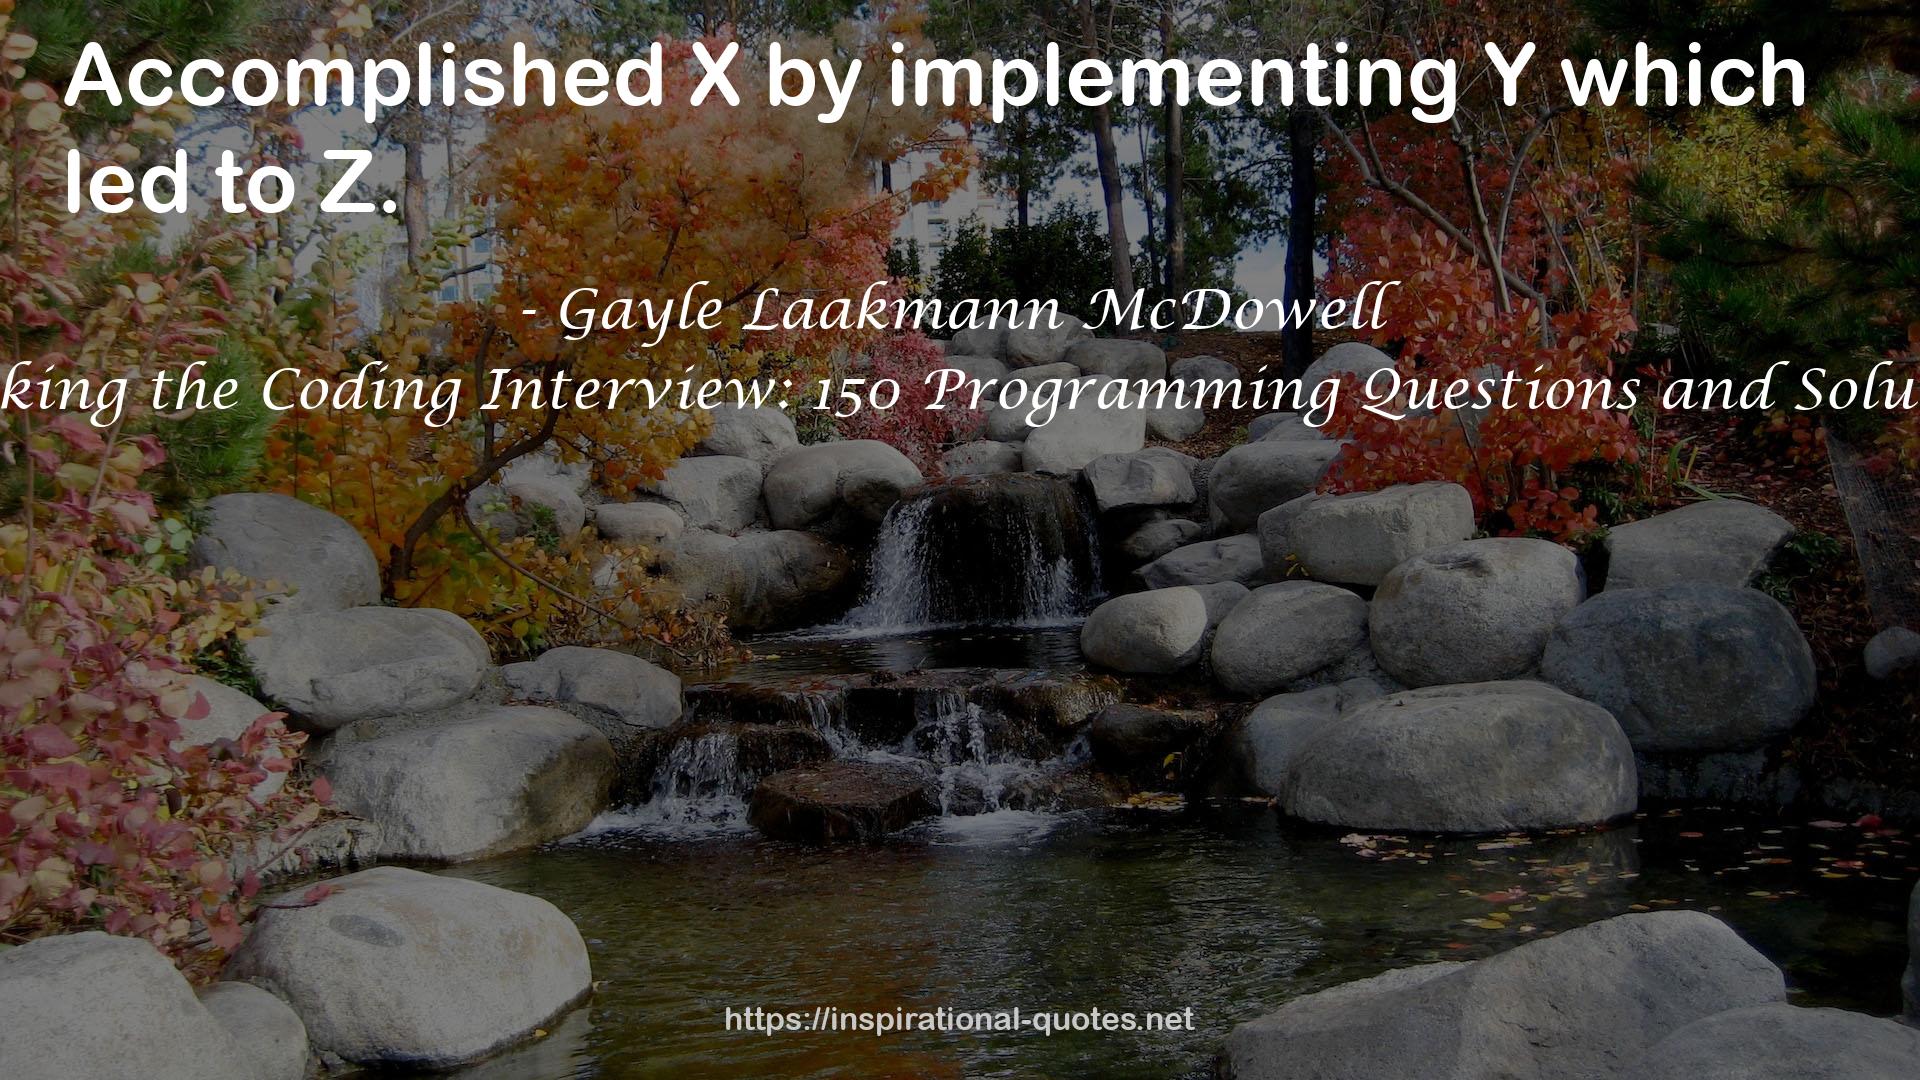 Cracking the Coding Interview: 150 Programming Questions and Solutions QUOTES